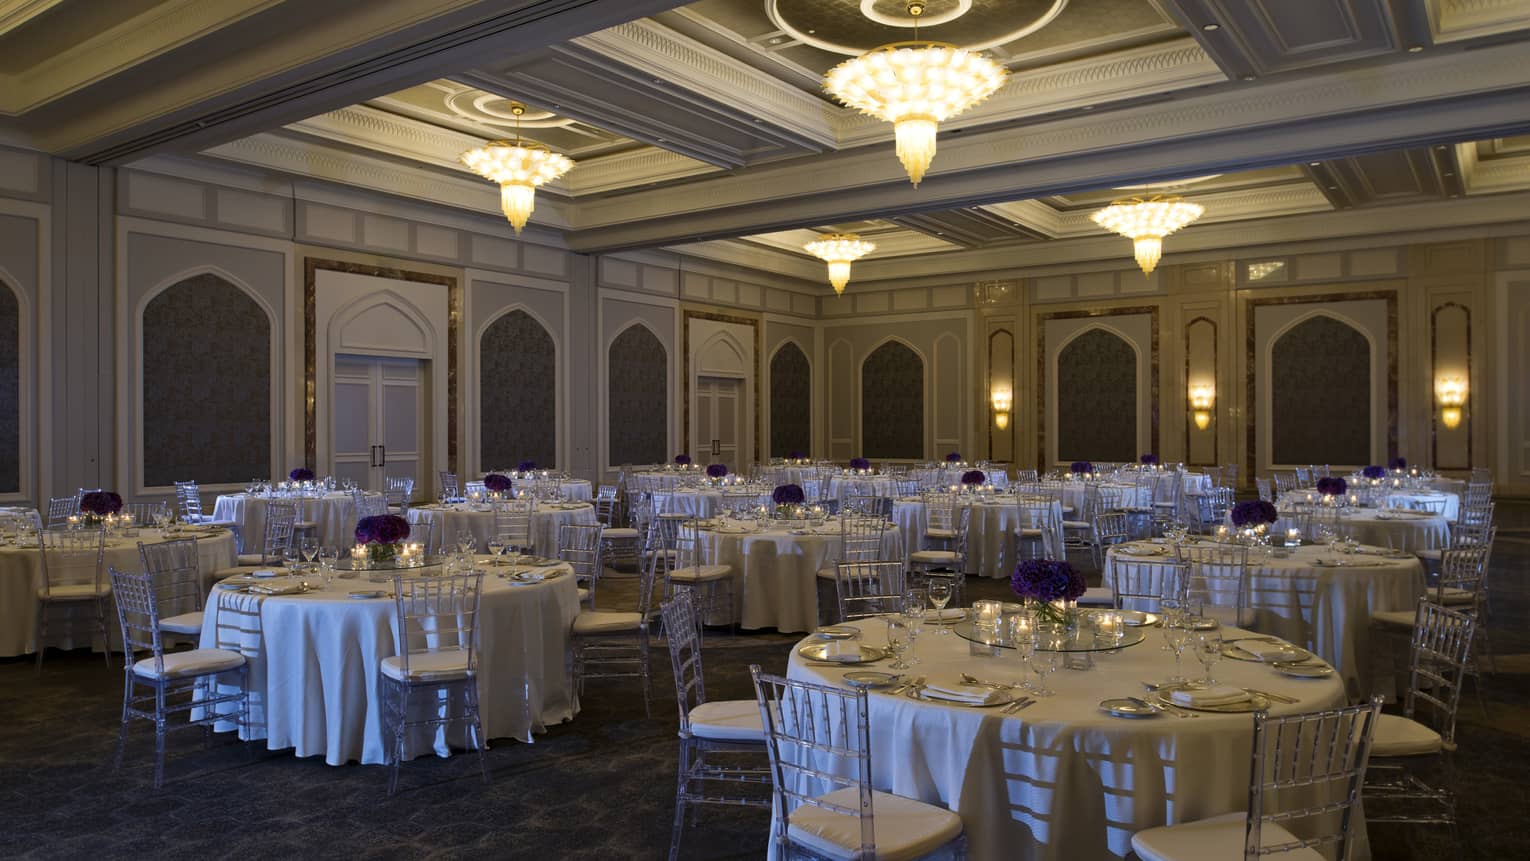 Ballroom with round banquet tables, chairs under small chandeliers 